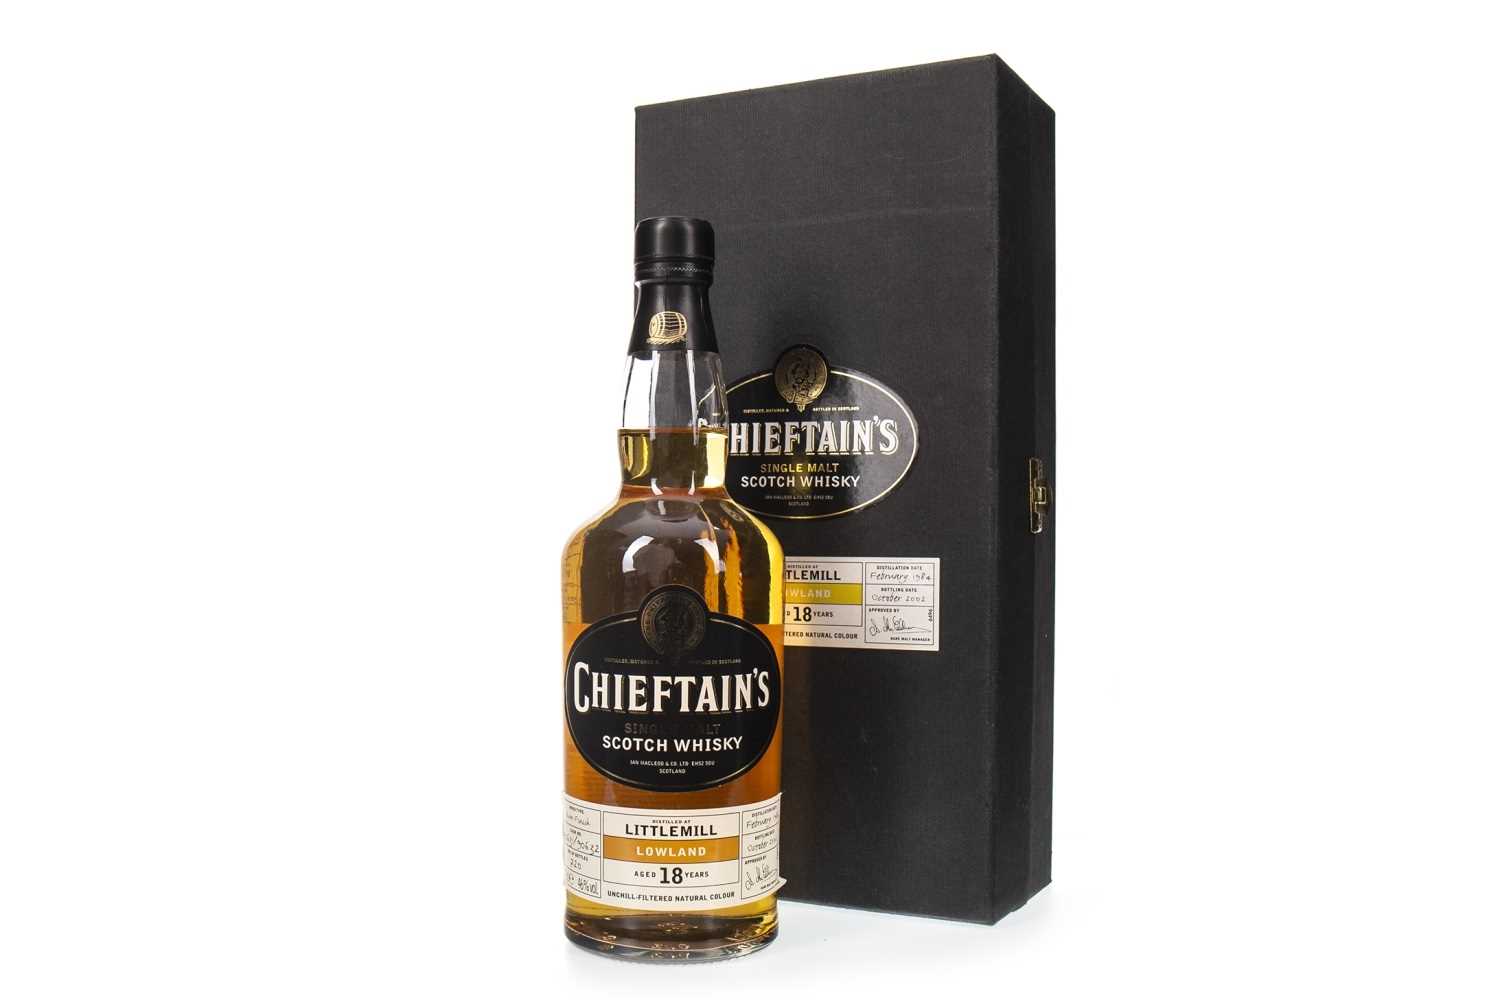 Lot 14 - LITTLEMILL 1984 CHIEFTAINS 18 YEARS OLD